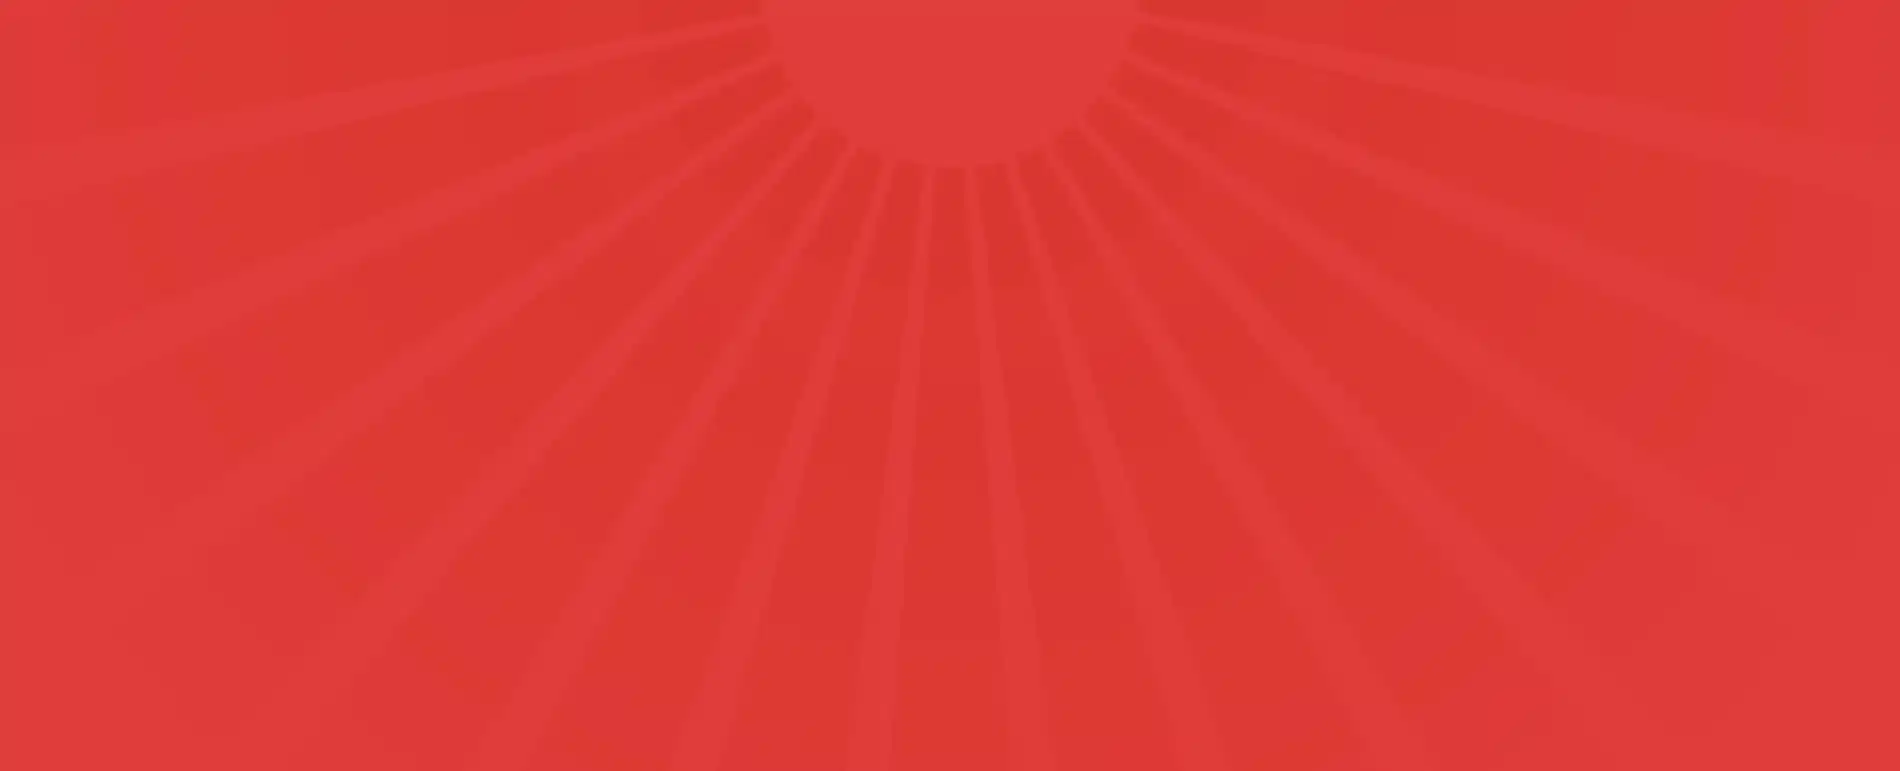 Bright red sun with spreading rays overlaying a darker red background